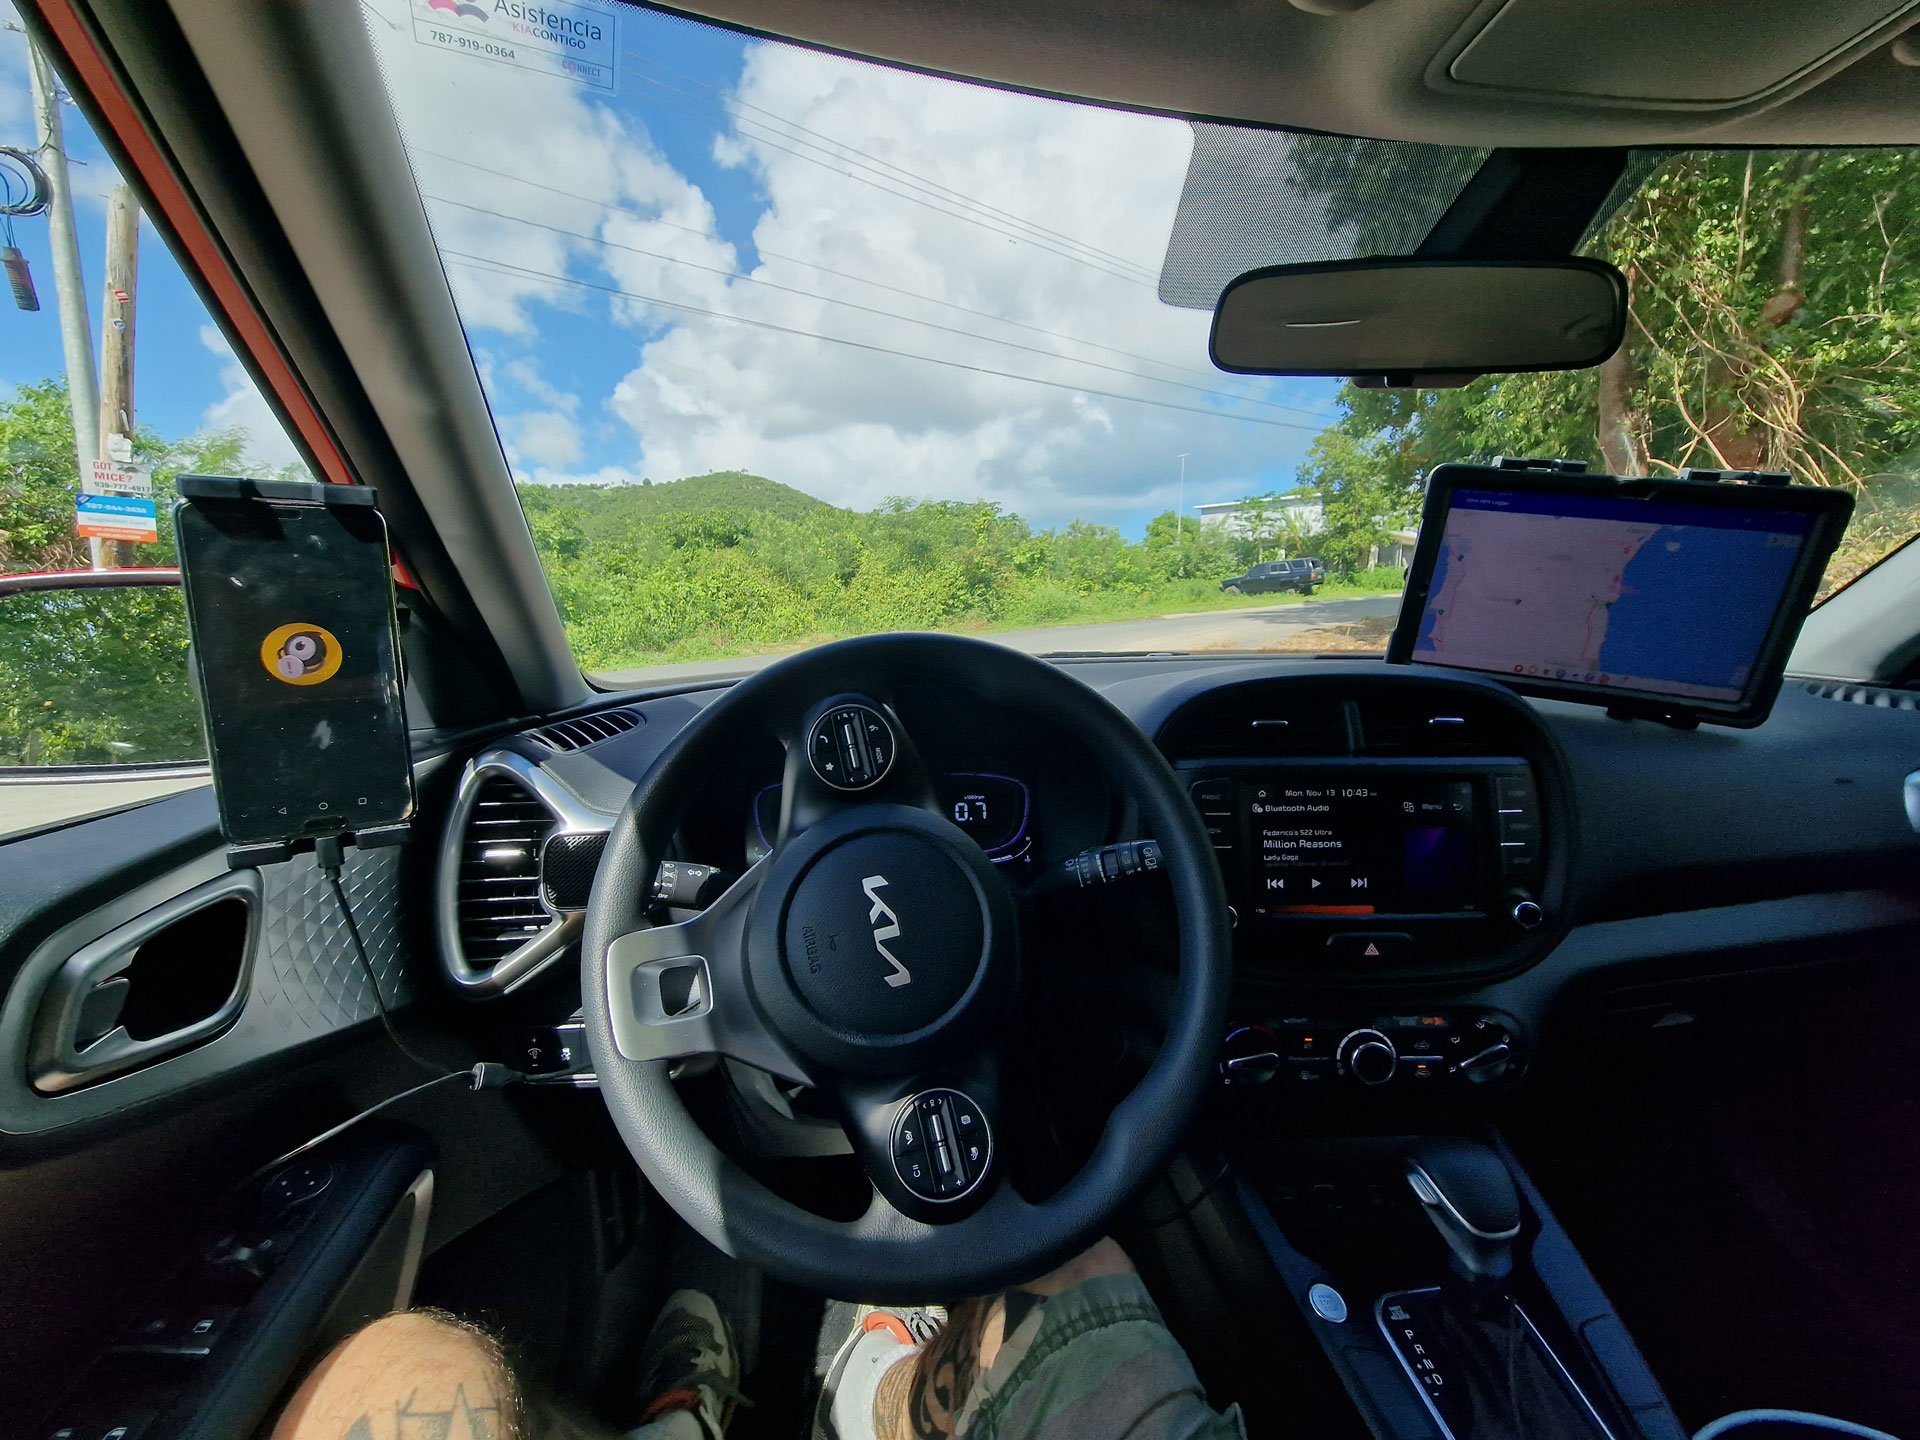 360-photography setup in car in Puerto Rico with Autori-app